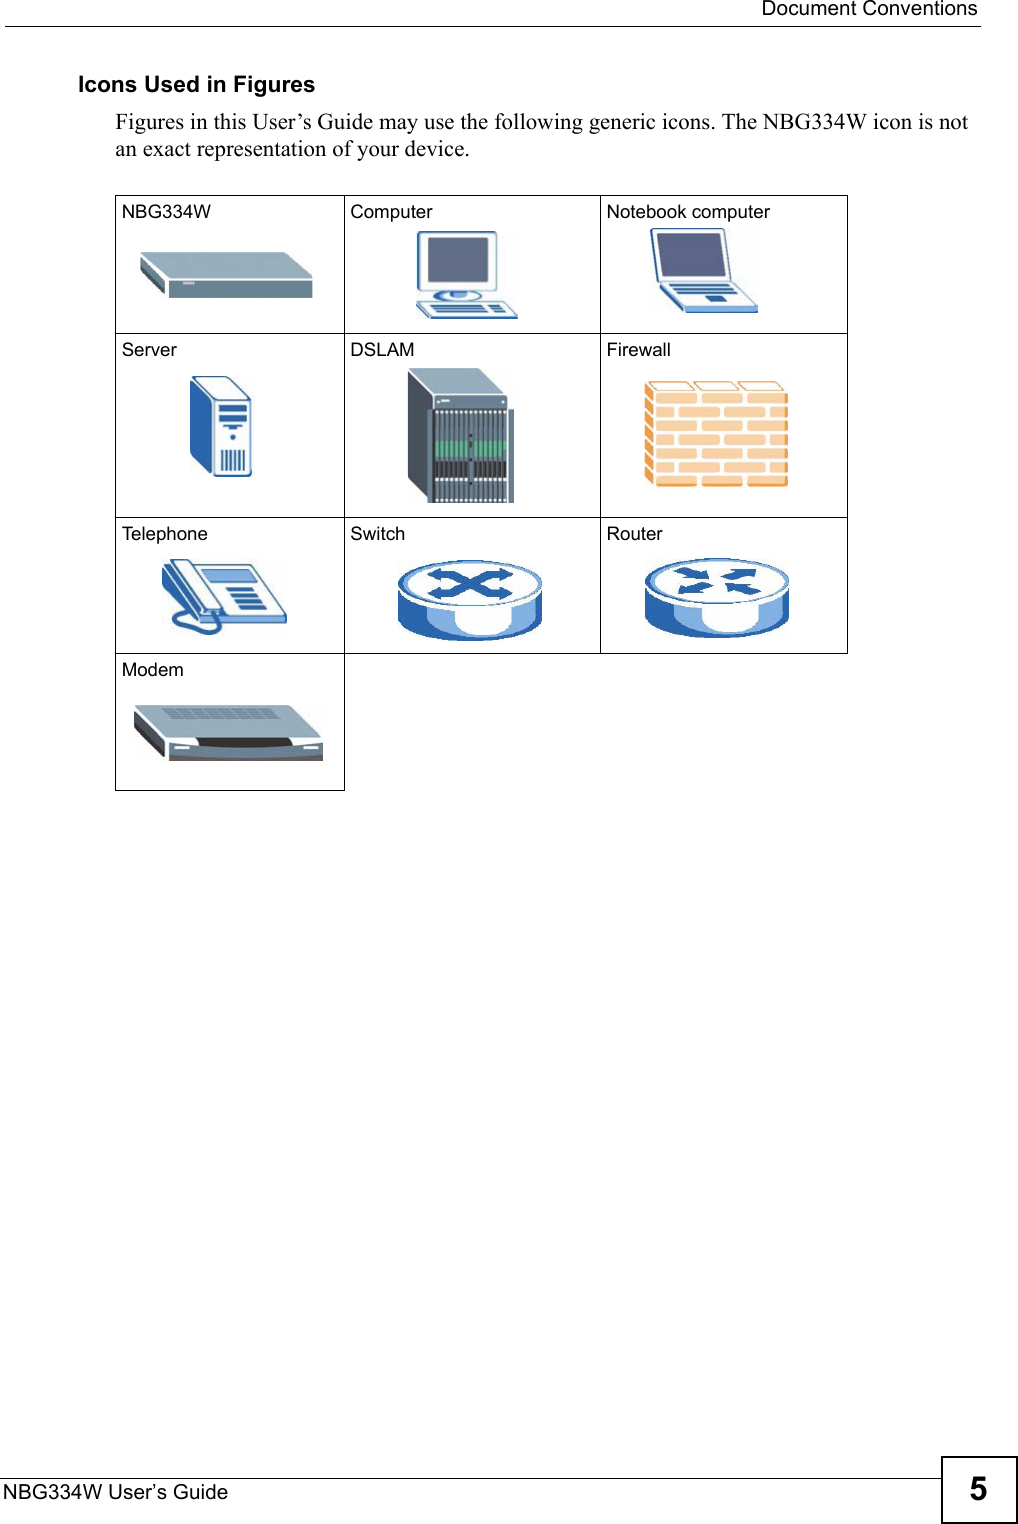  Document ConventionsNBG334W User’s Guide 5Icons Used in FiguresFigures in this User’s Guide may use the following generic icons. The NBG334W icon is not an exact representation of your device.NBG334W Computer Notebook computerServer DSLAM FirewallTelephone Switch RouterModem